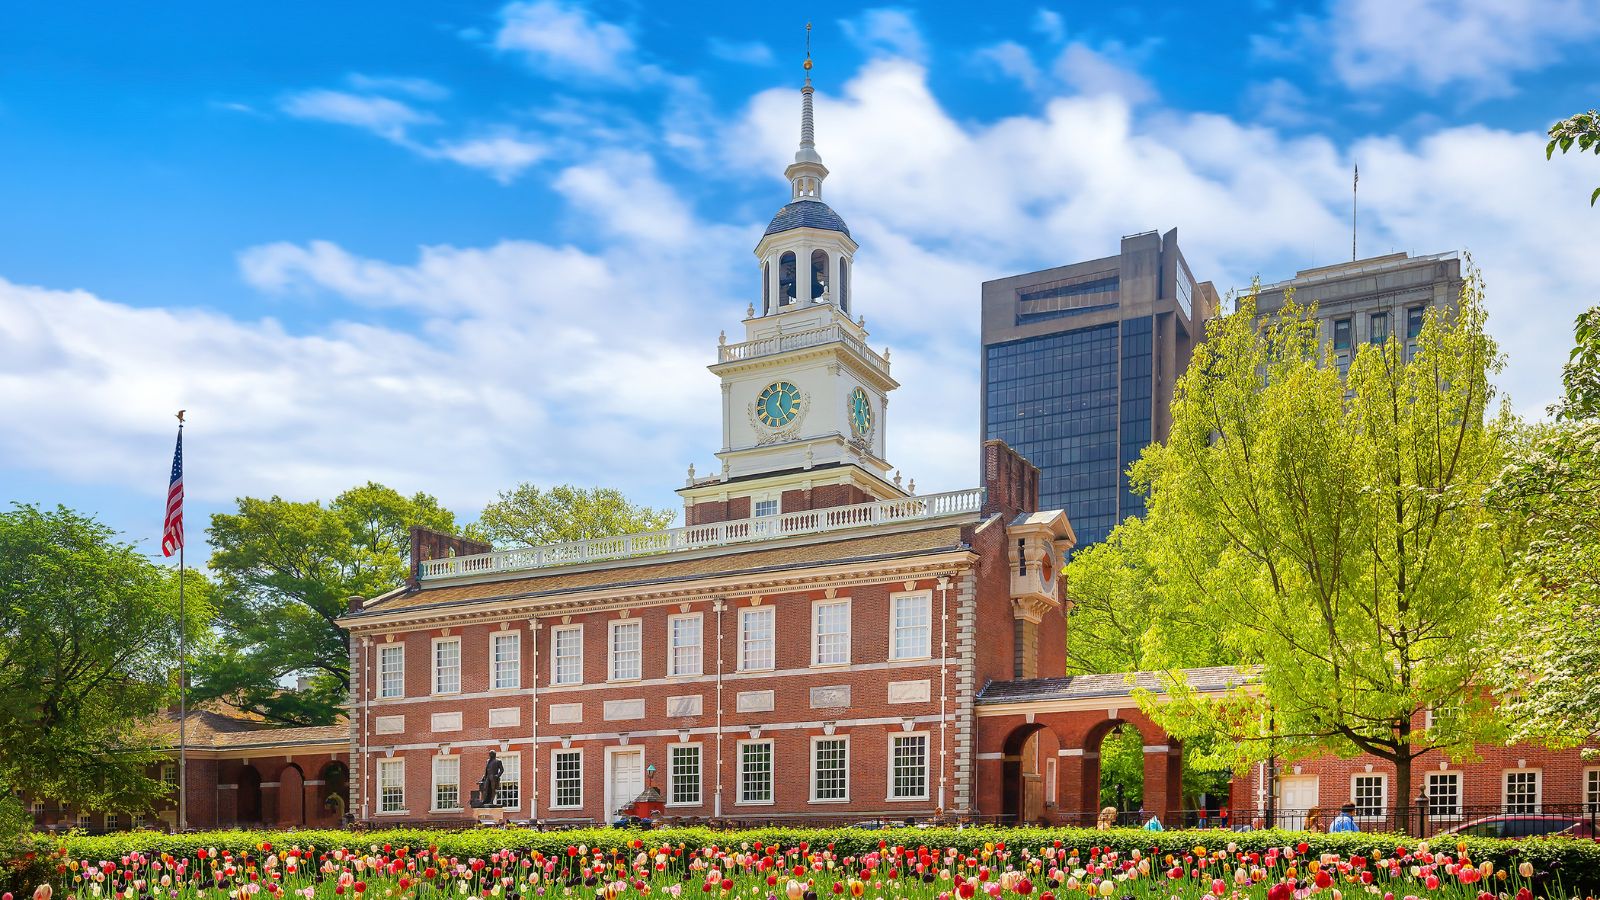 <p>Recommended by 56% of visitors</p><p>Situated in Philadelphia’s Old City district, Independence Hall is a UNESCO World Heritage Site and a must-see for history buffs. It’s famously known as the birthplace of America, where the US Constitution and the Declaration of Independence were signed. Visitors can embark on guided tours, exploring the historic courtroom and immersing themselves in the rich history of this iconic landmark. It showcases George Washington’s “sunburst” chair and the original inkstand that was used to sign the Declaration of Independence. The original draft of the US Constitution is also on display, making Independence Hall a vivid window into the Revolutionary era.</p>